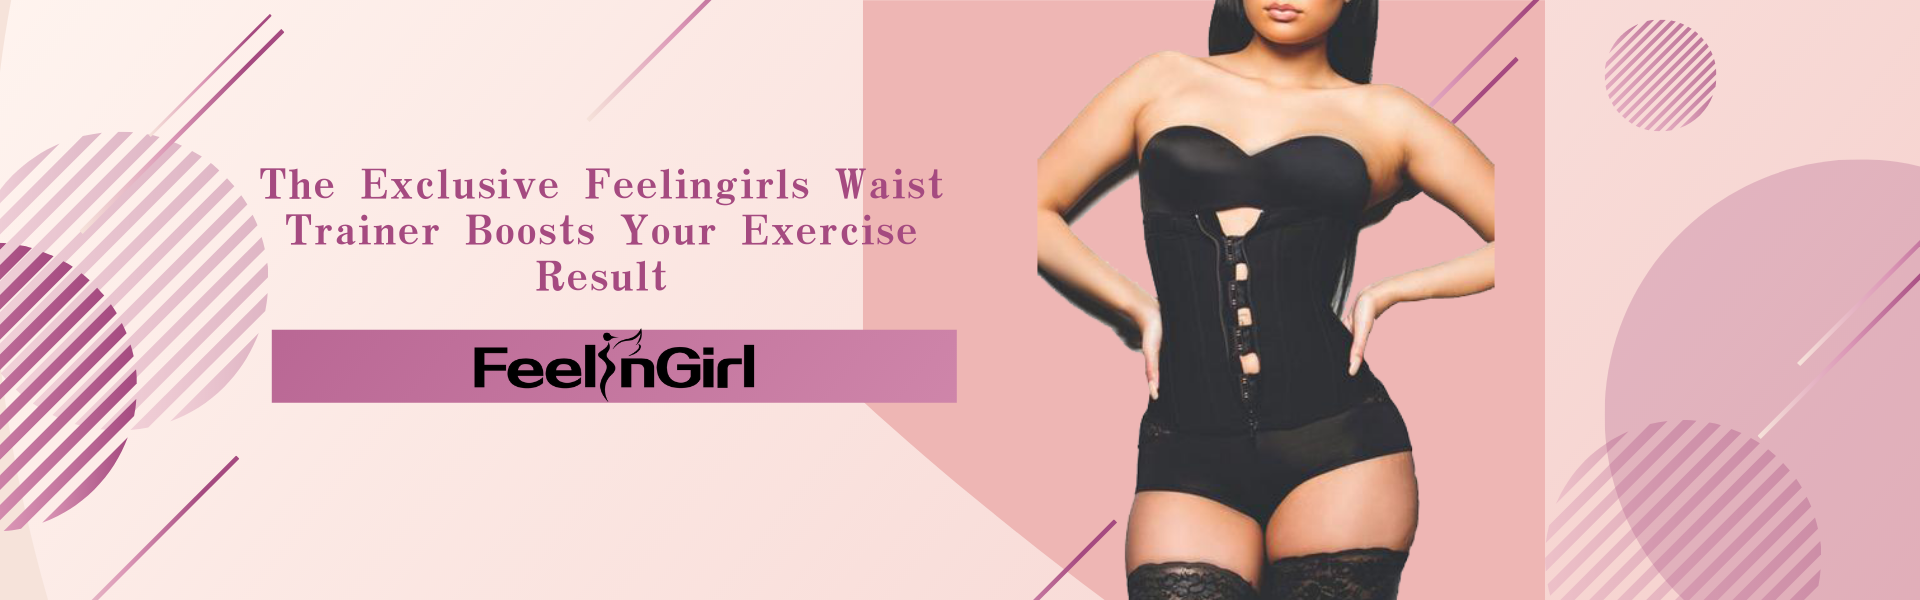 The Exclusive Feelingirls Waist Trainer Boosts Your Exercise Result